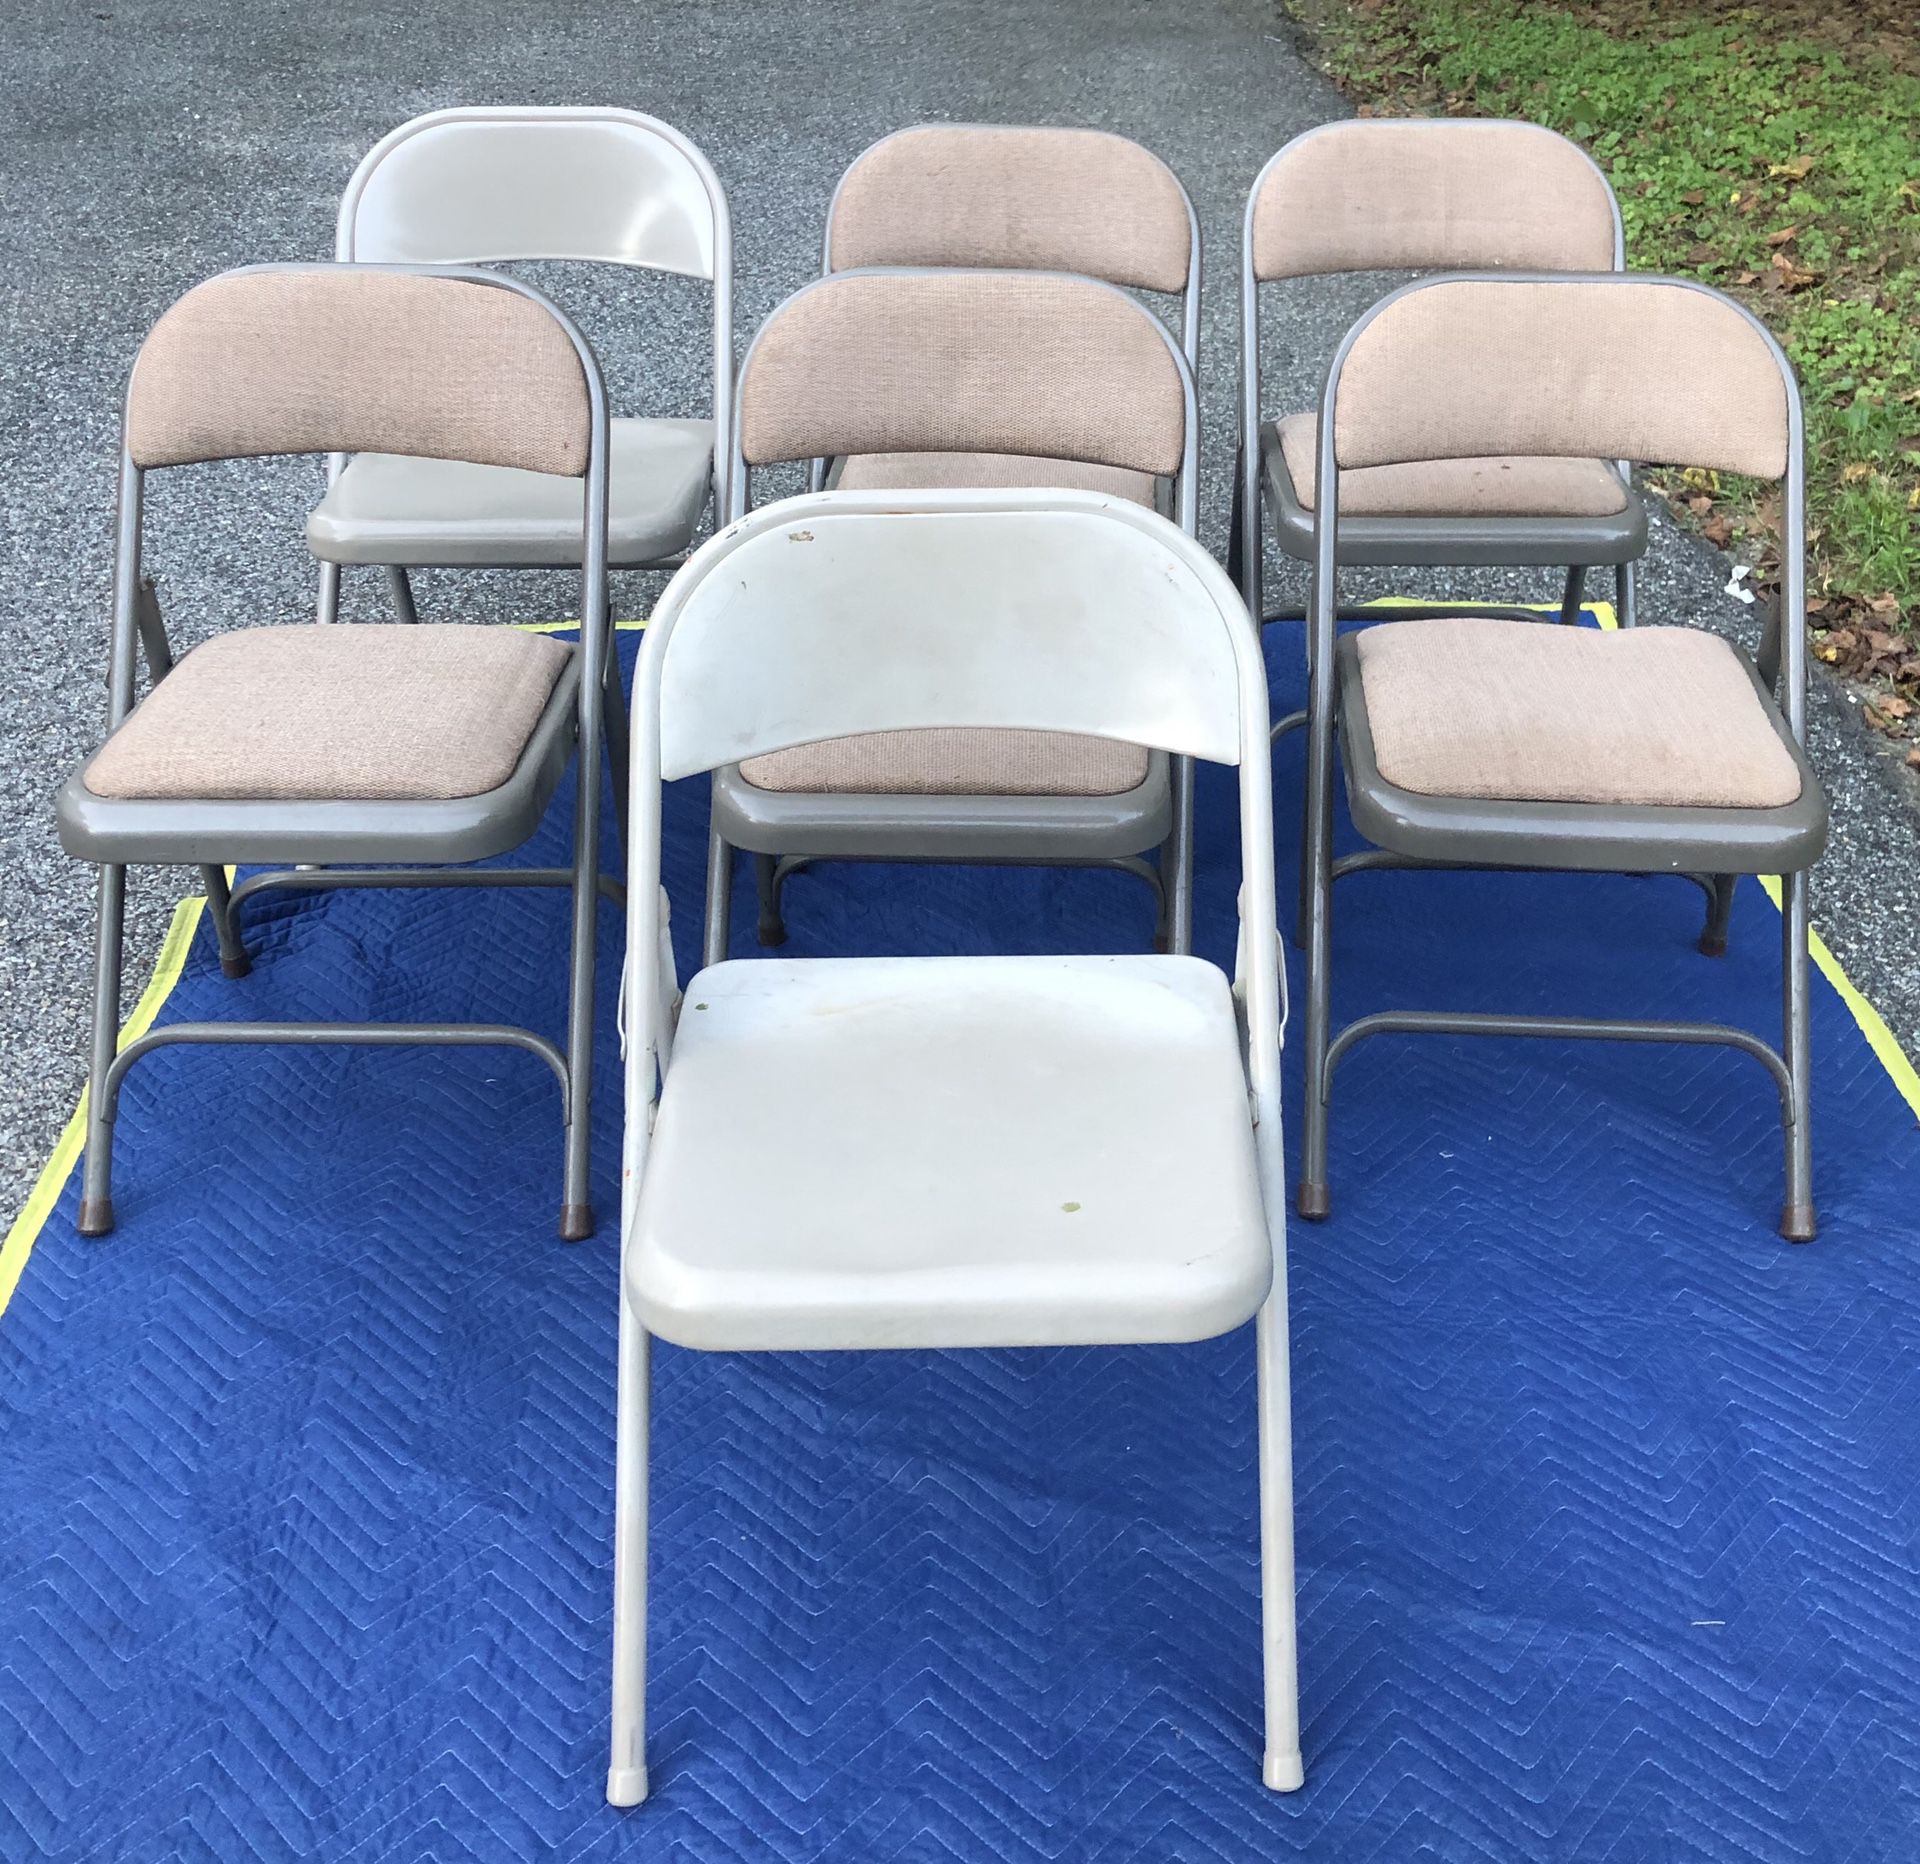 7 chairs and table and also comes with free black chair. (Offers $160 or higher)